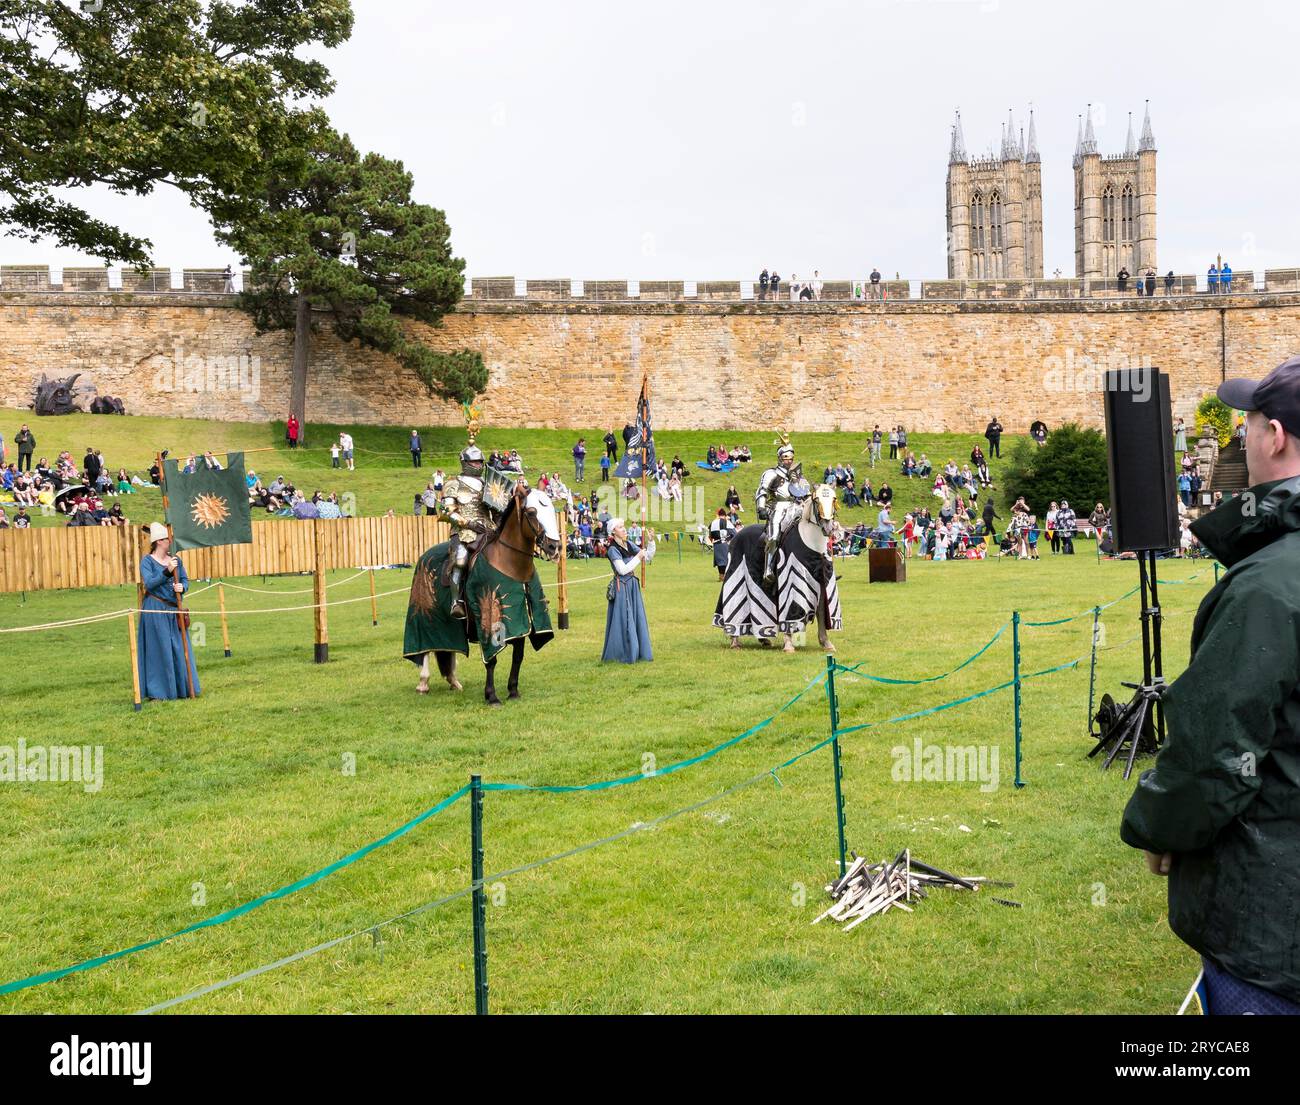 Two jousting knights on horseback with helpers holding banners taking audience applause, Lincoln castle, Lincoln City, Lincolnshire, England, UK Stock Photo